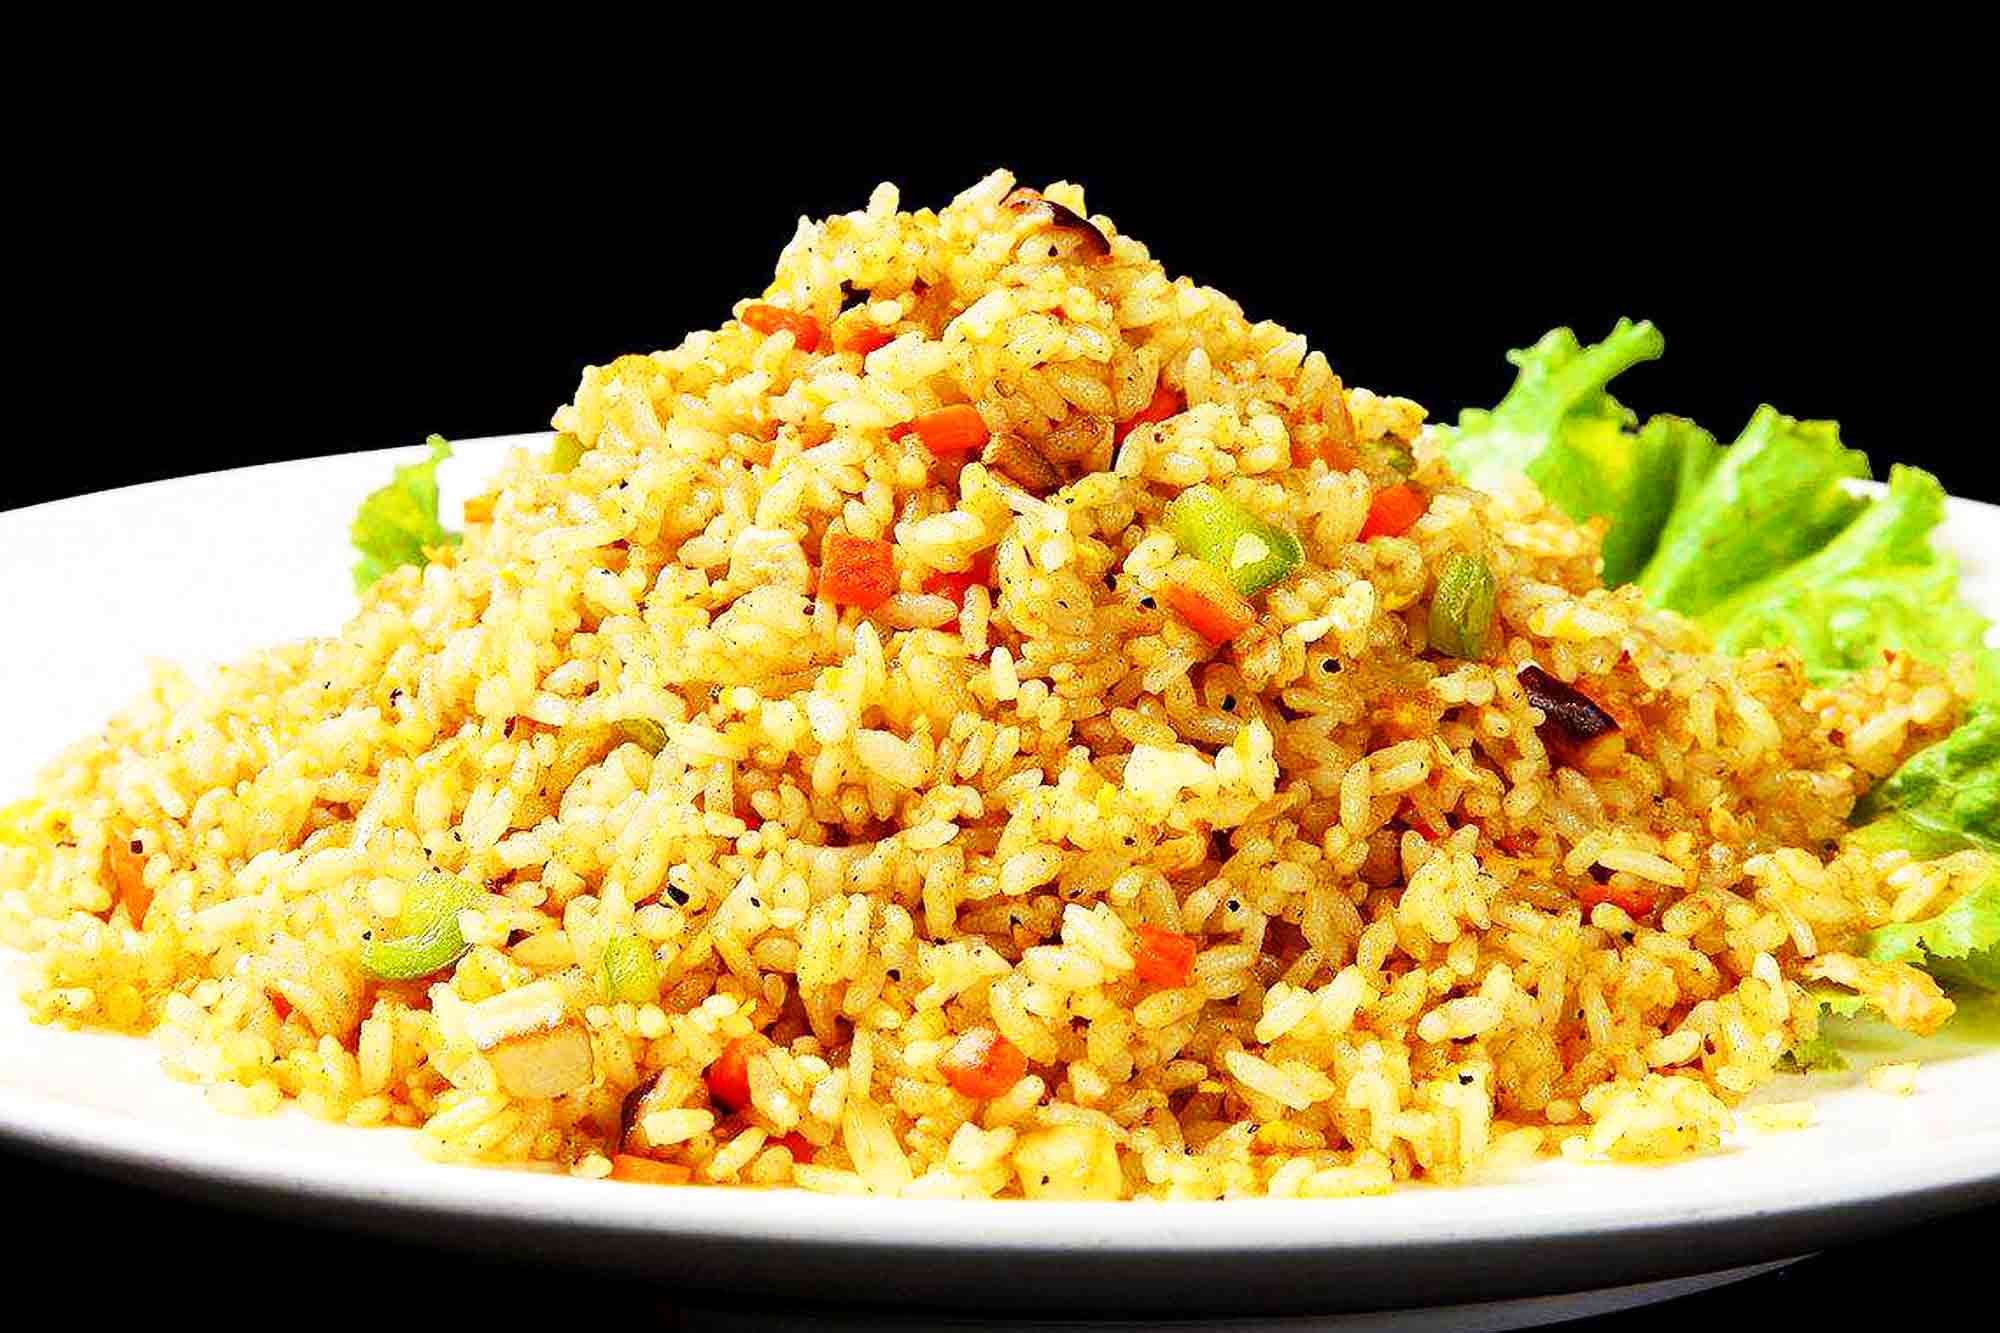 https://howtomakerecipes.com/wp-content/uploads/2022/07/uncle-rogers-egg-fried-rice-recipe1.jpg